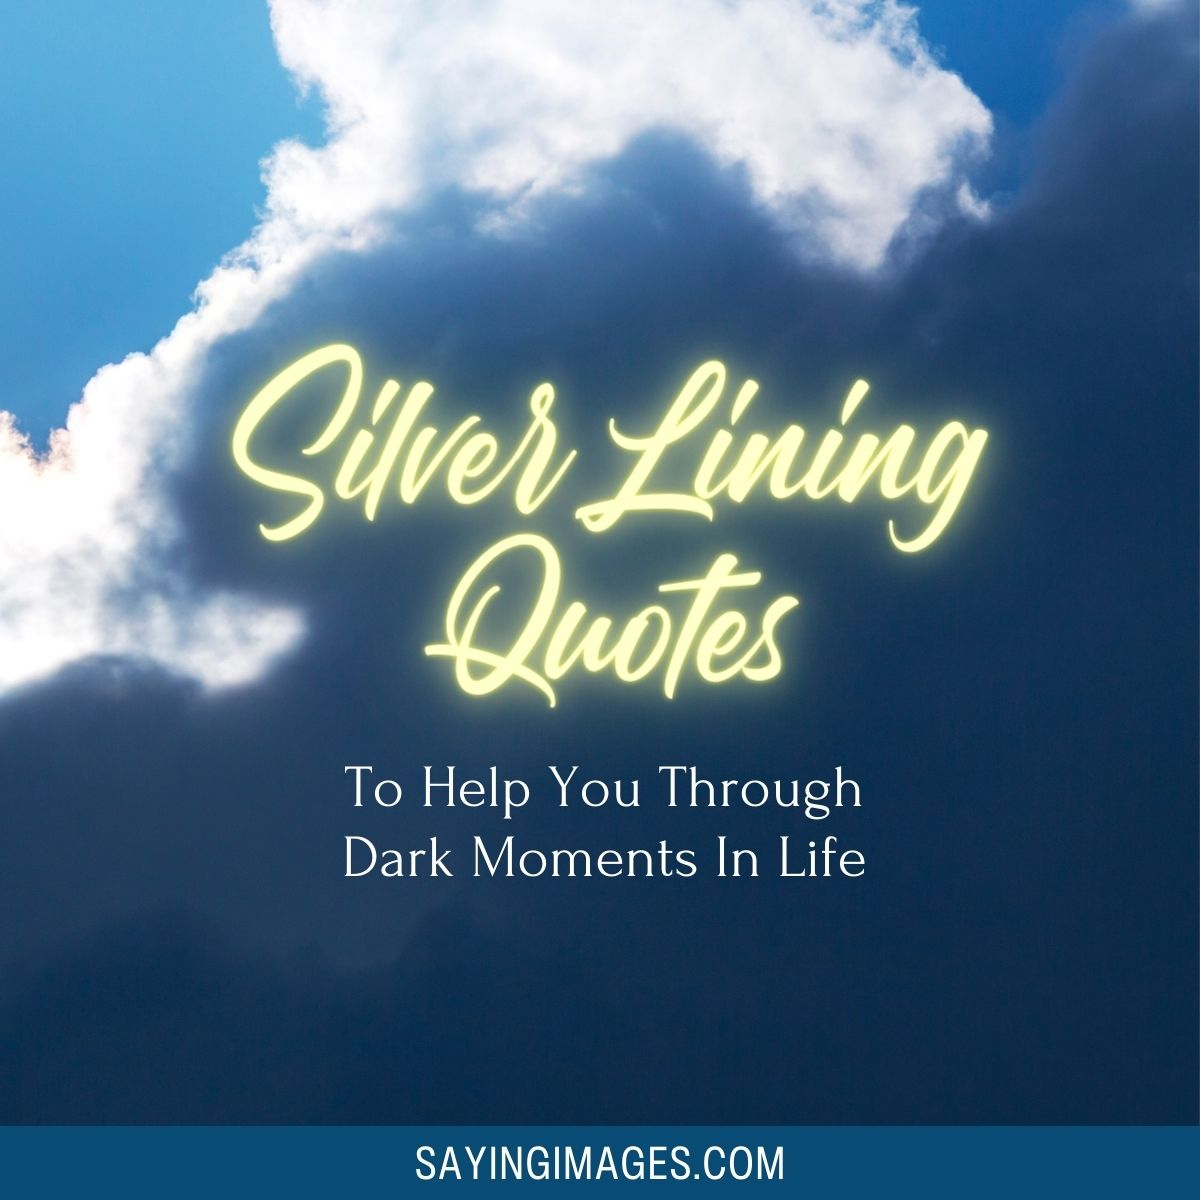 Silver Lining Quotes To Help You Through Dark Moments In Life